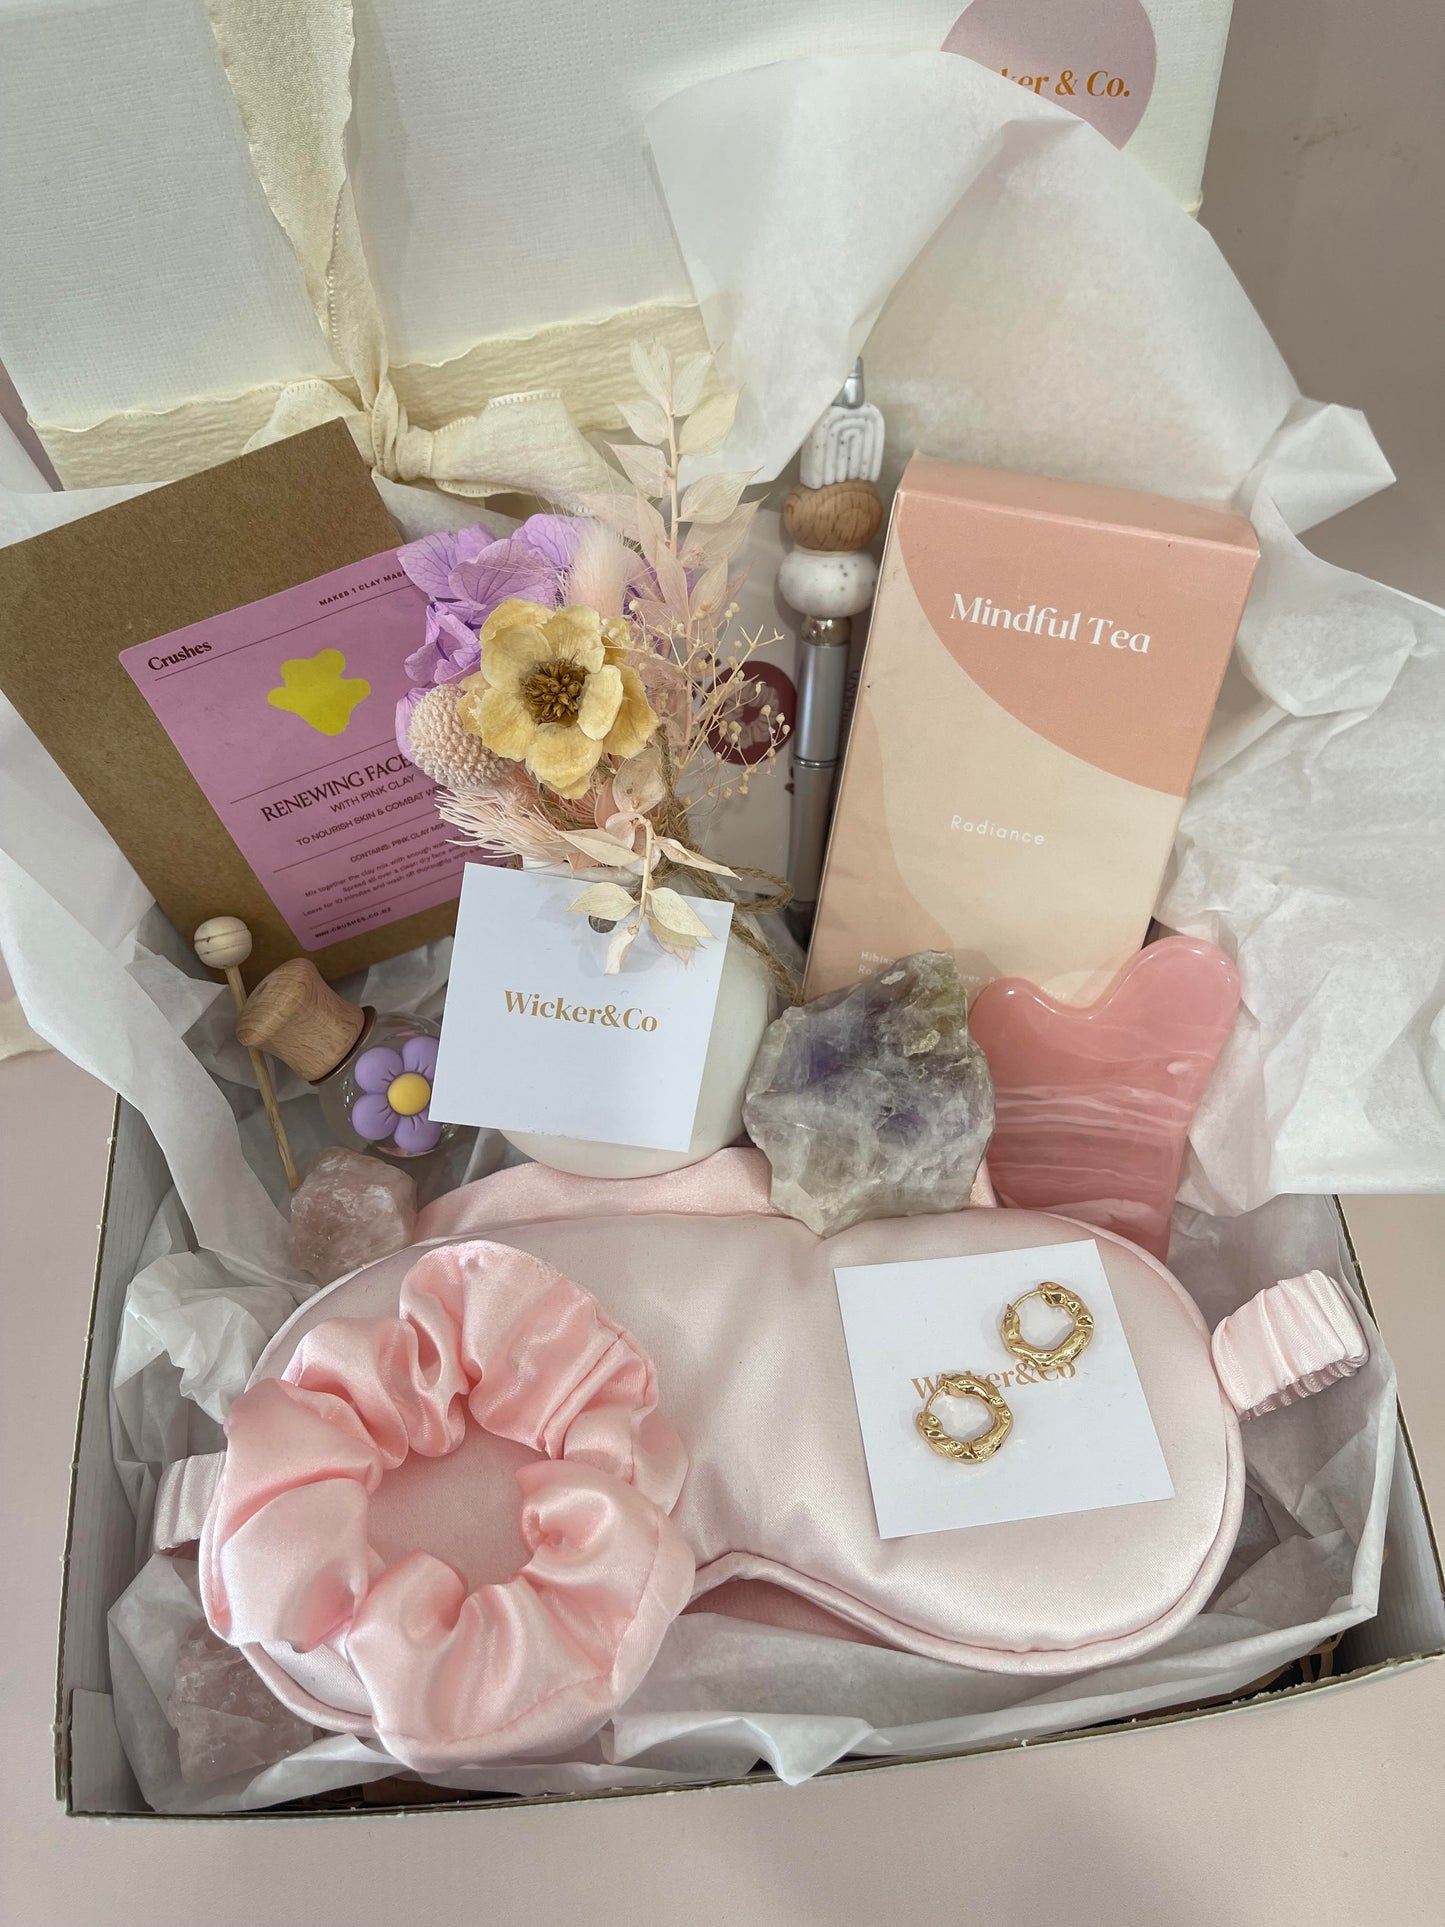 My Favorite color is pink be-spoke gift box